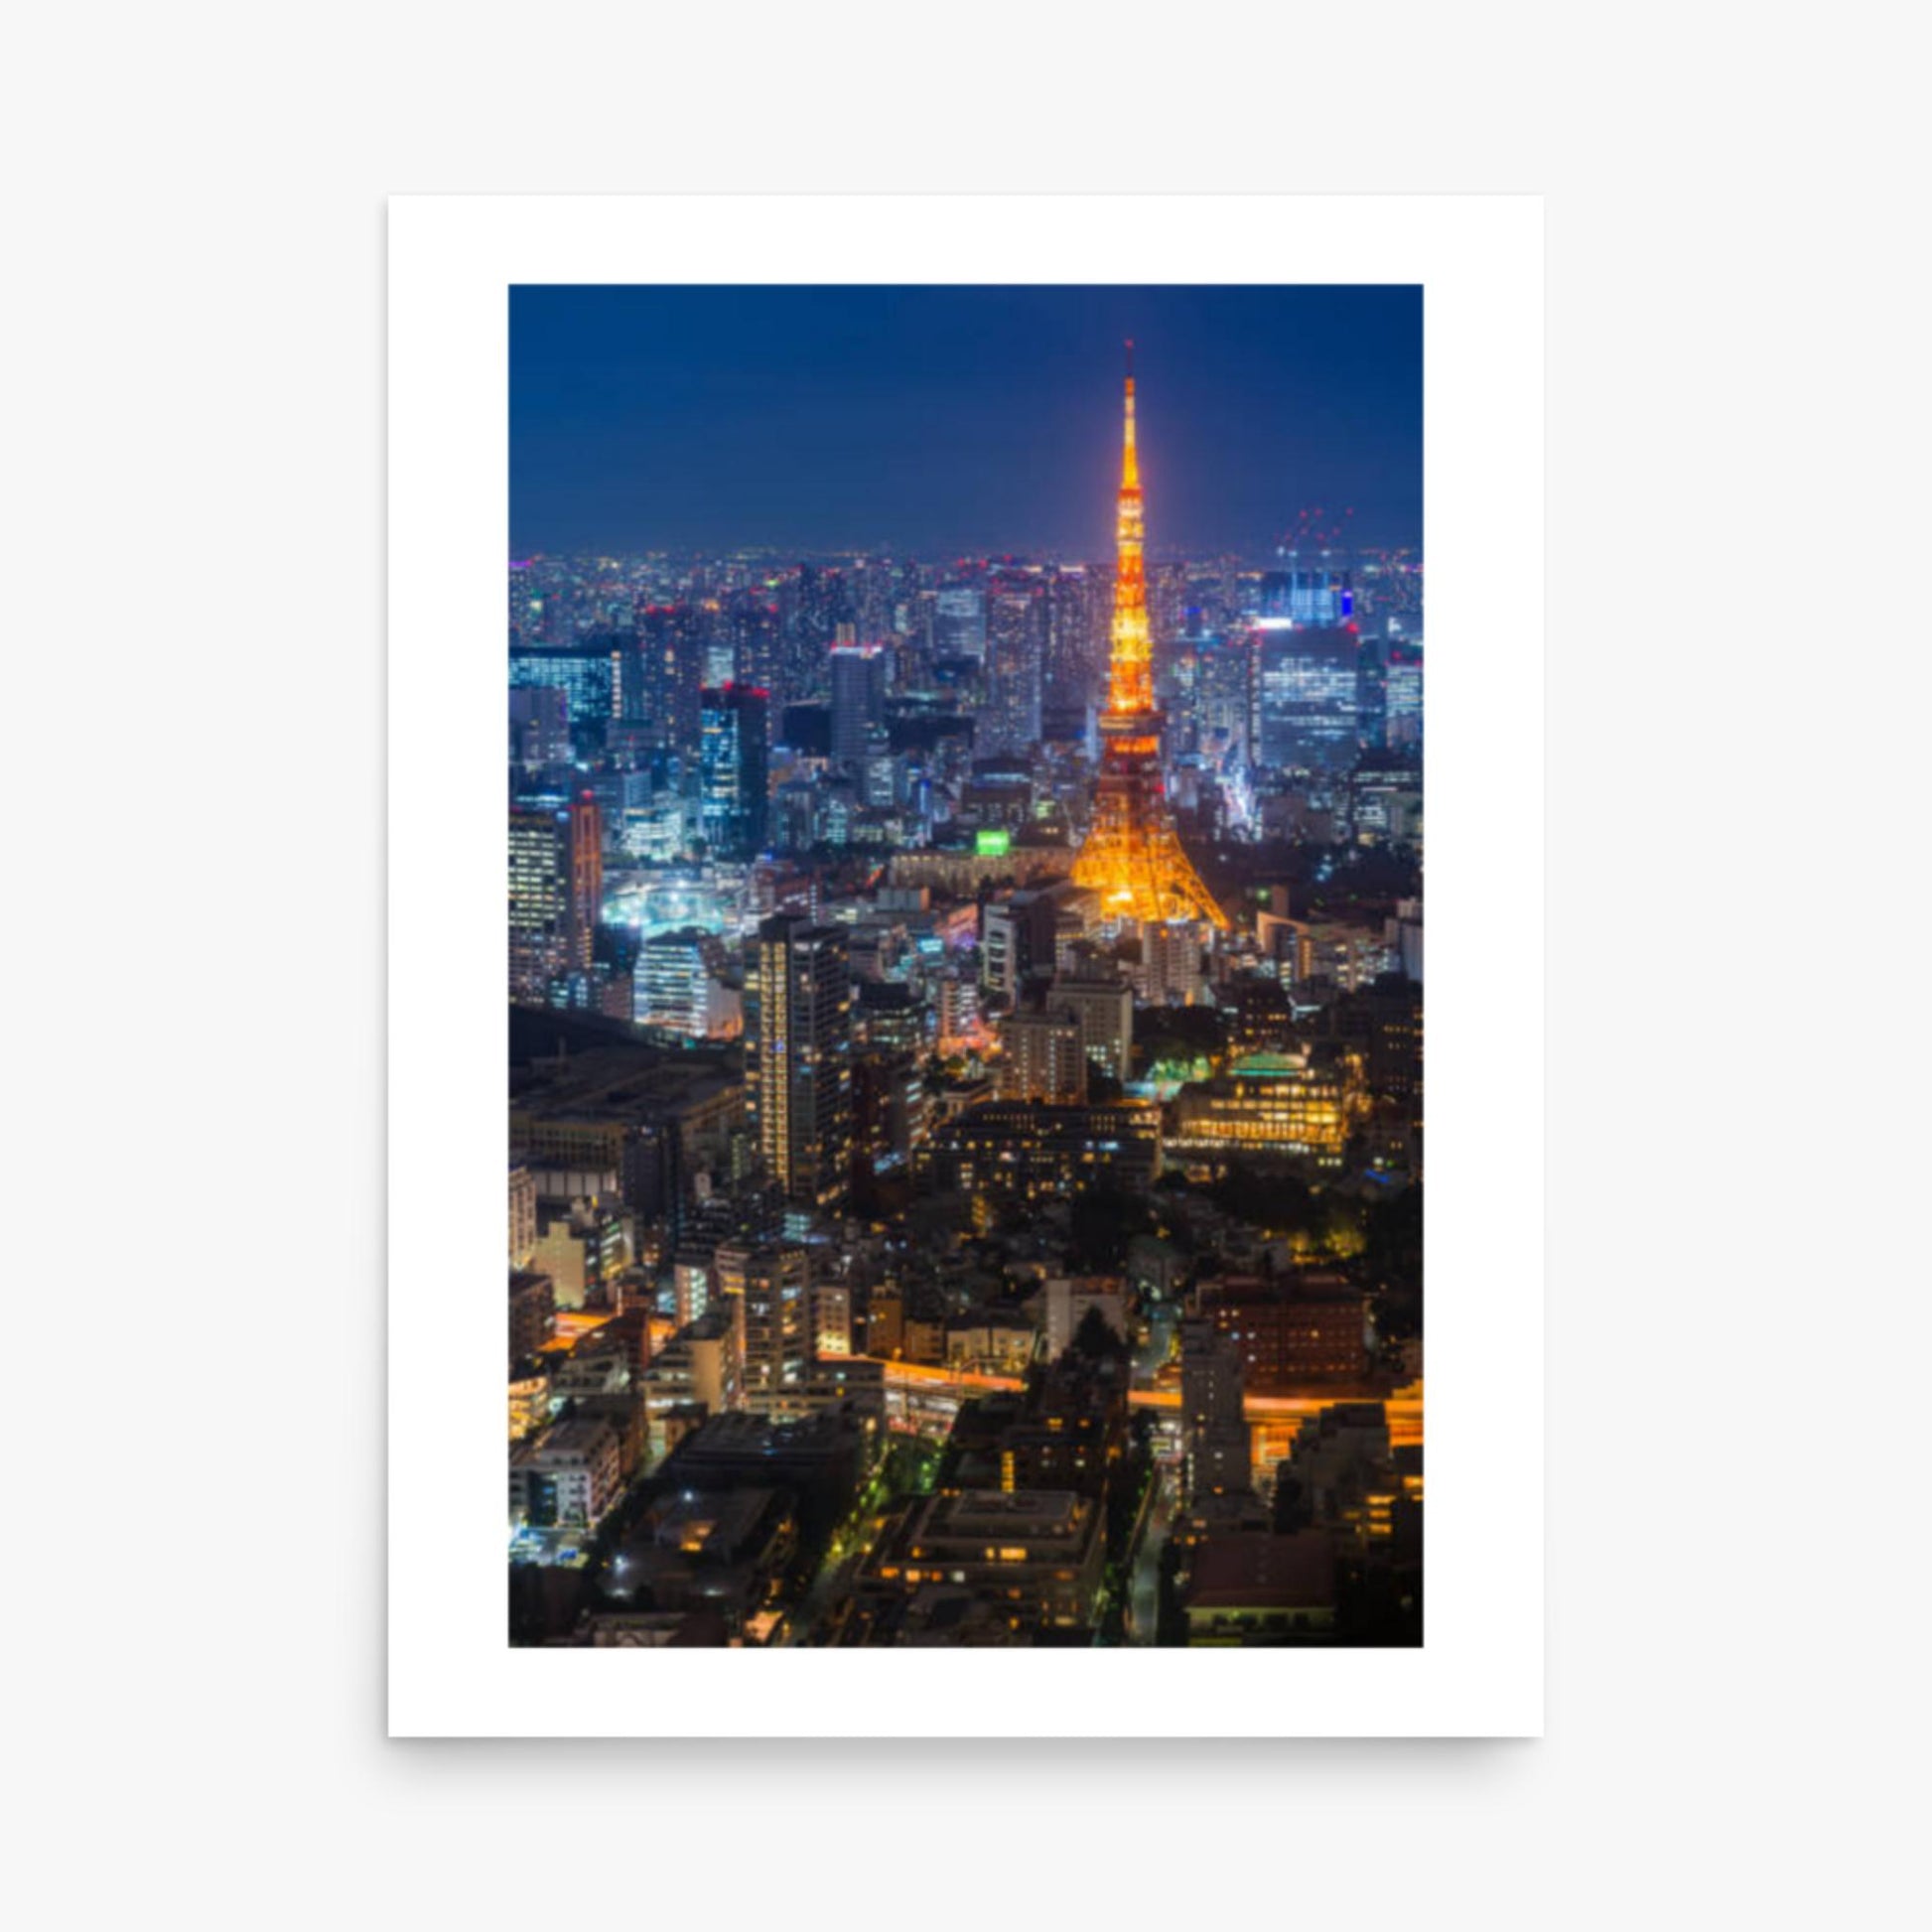 Tokyo Tower illuminated 18x24 in Poster